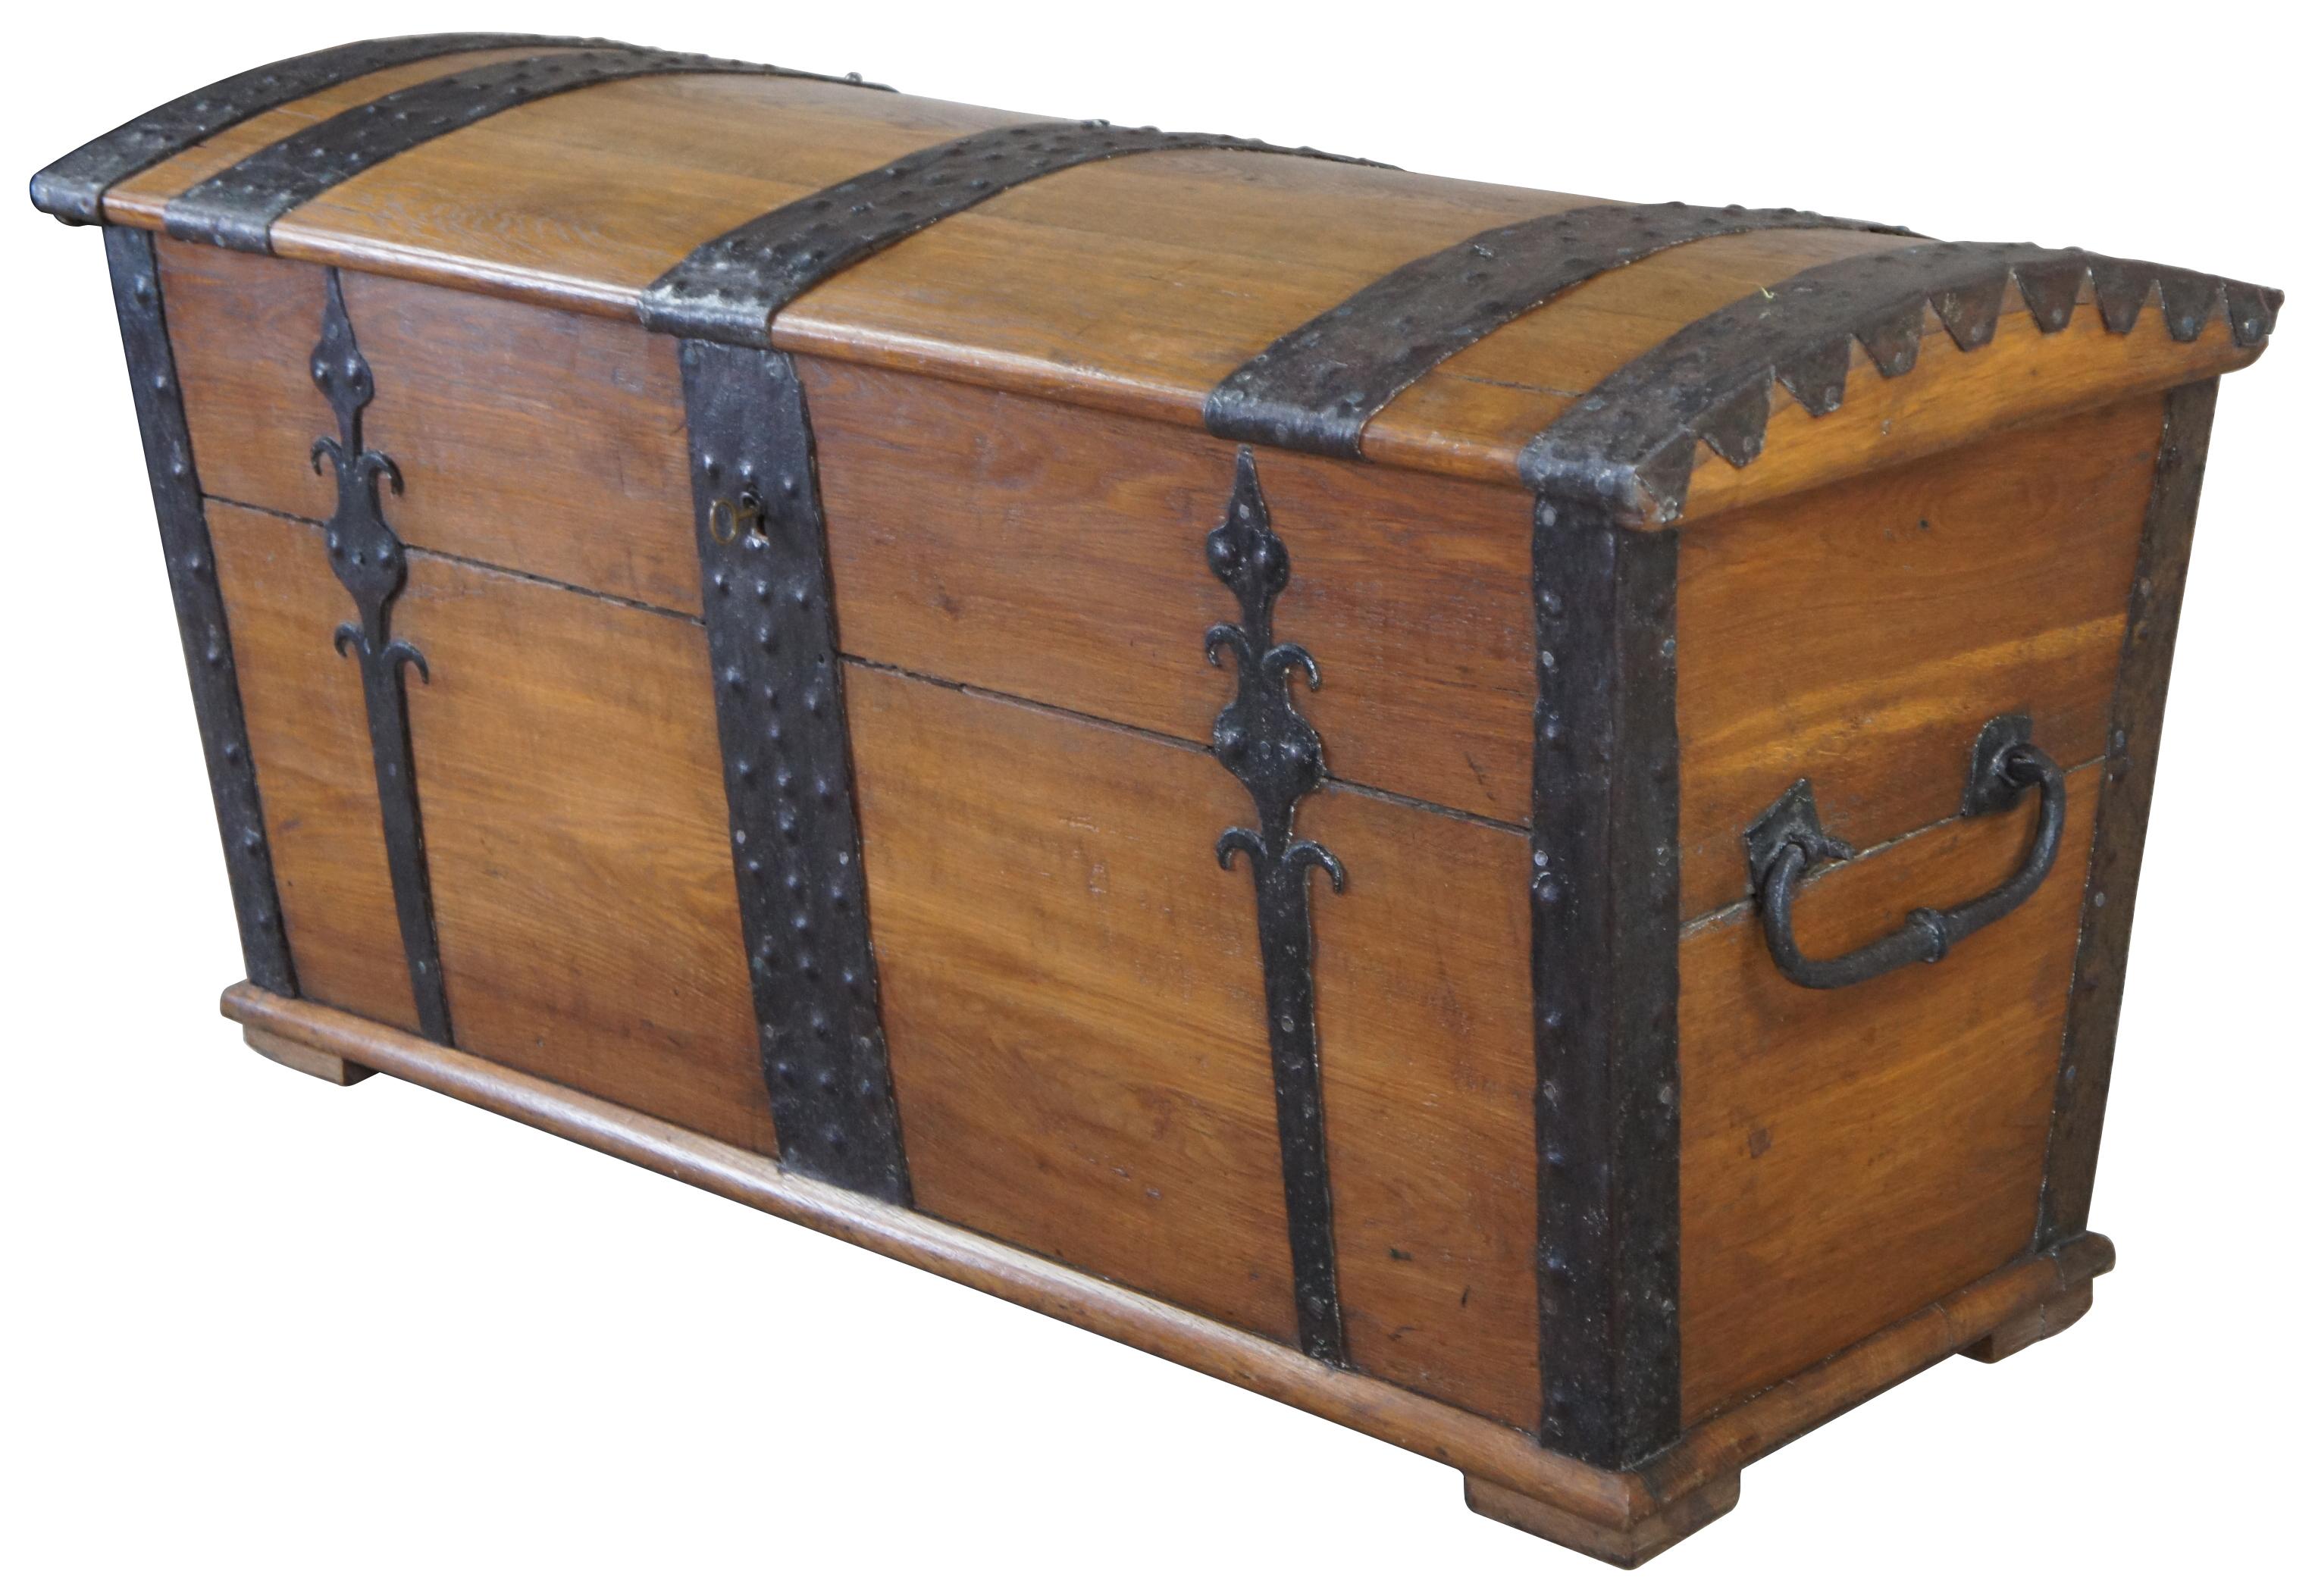 Designed to serve as a container for sea transport, sea chests were sometimes elaborately adorned with intricate ironwork as is the case with this museum quality extra large, hinged, dome top chest. The chest has high quality, detailed, decorative